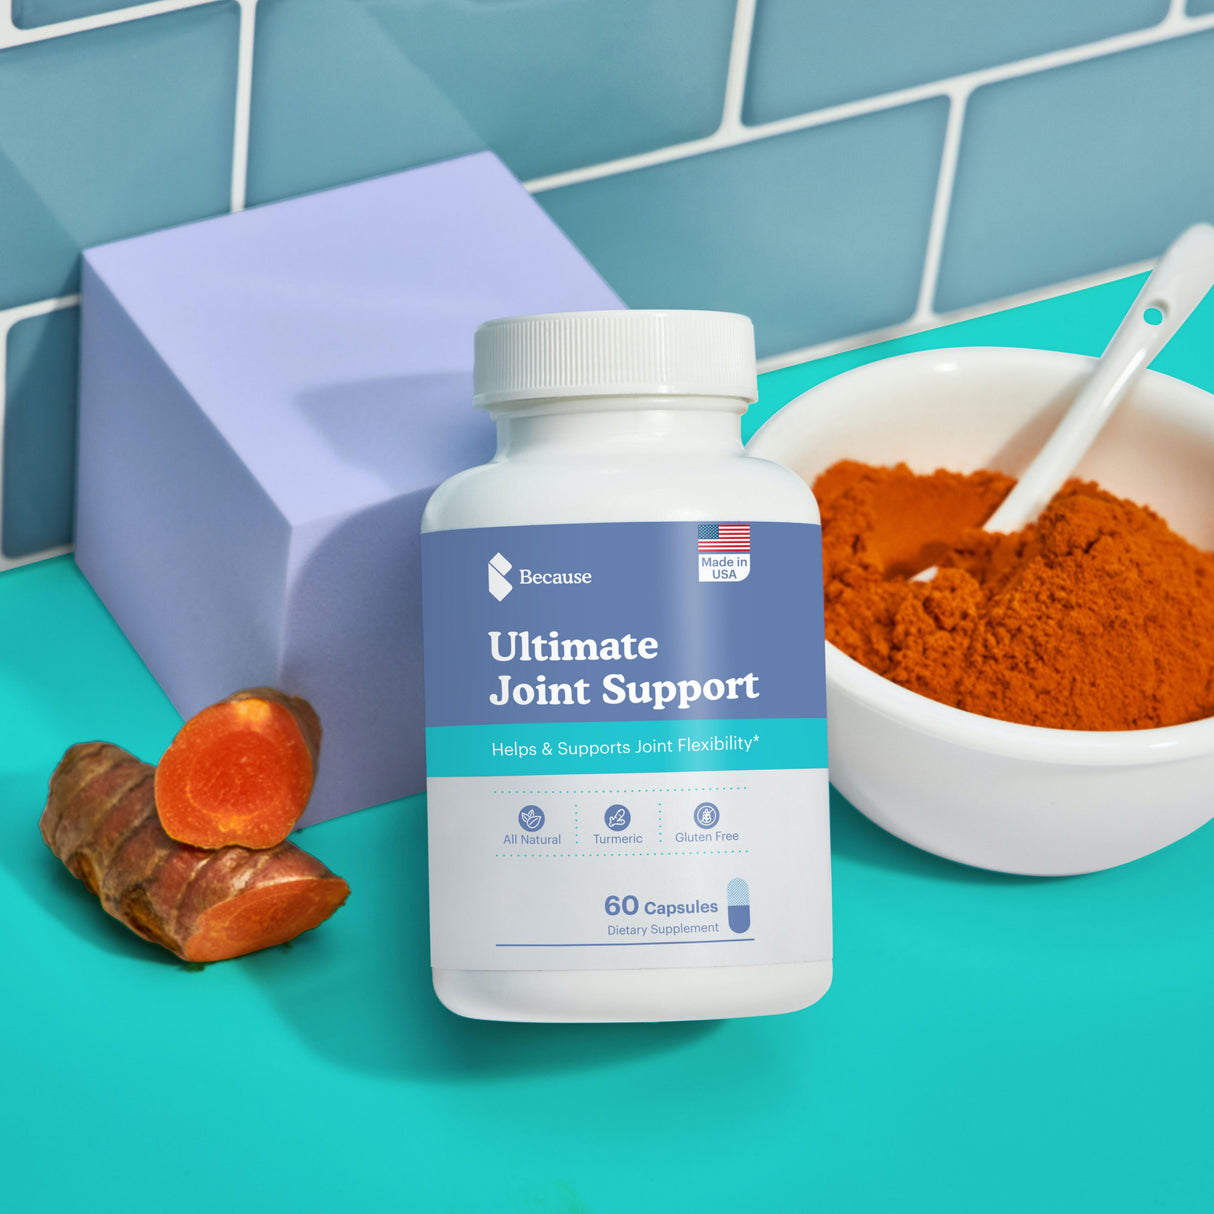 Ultimate joint support vitamin bottle on a kitchen counter next to fresh turmeric